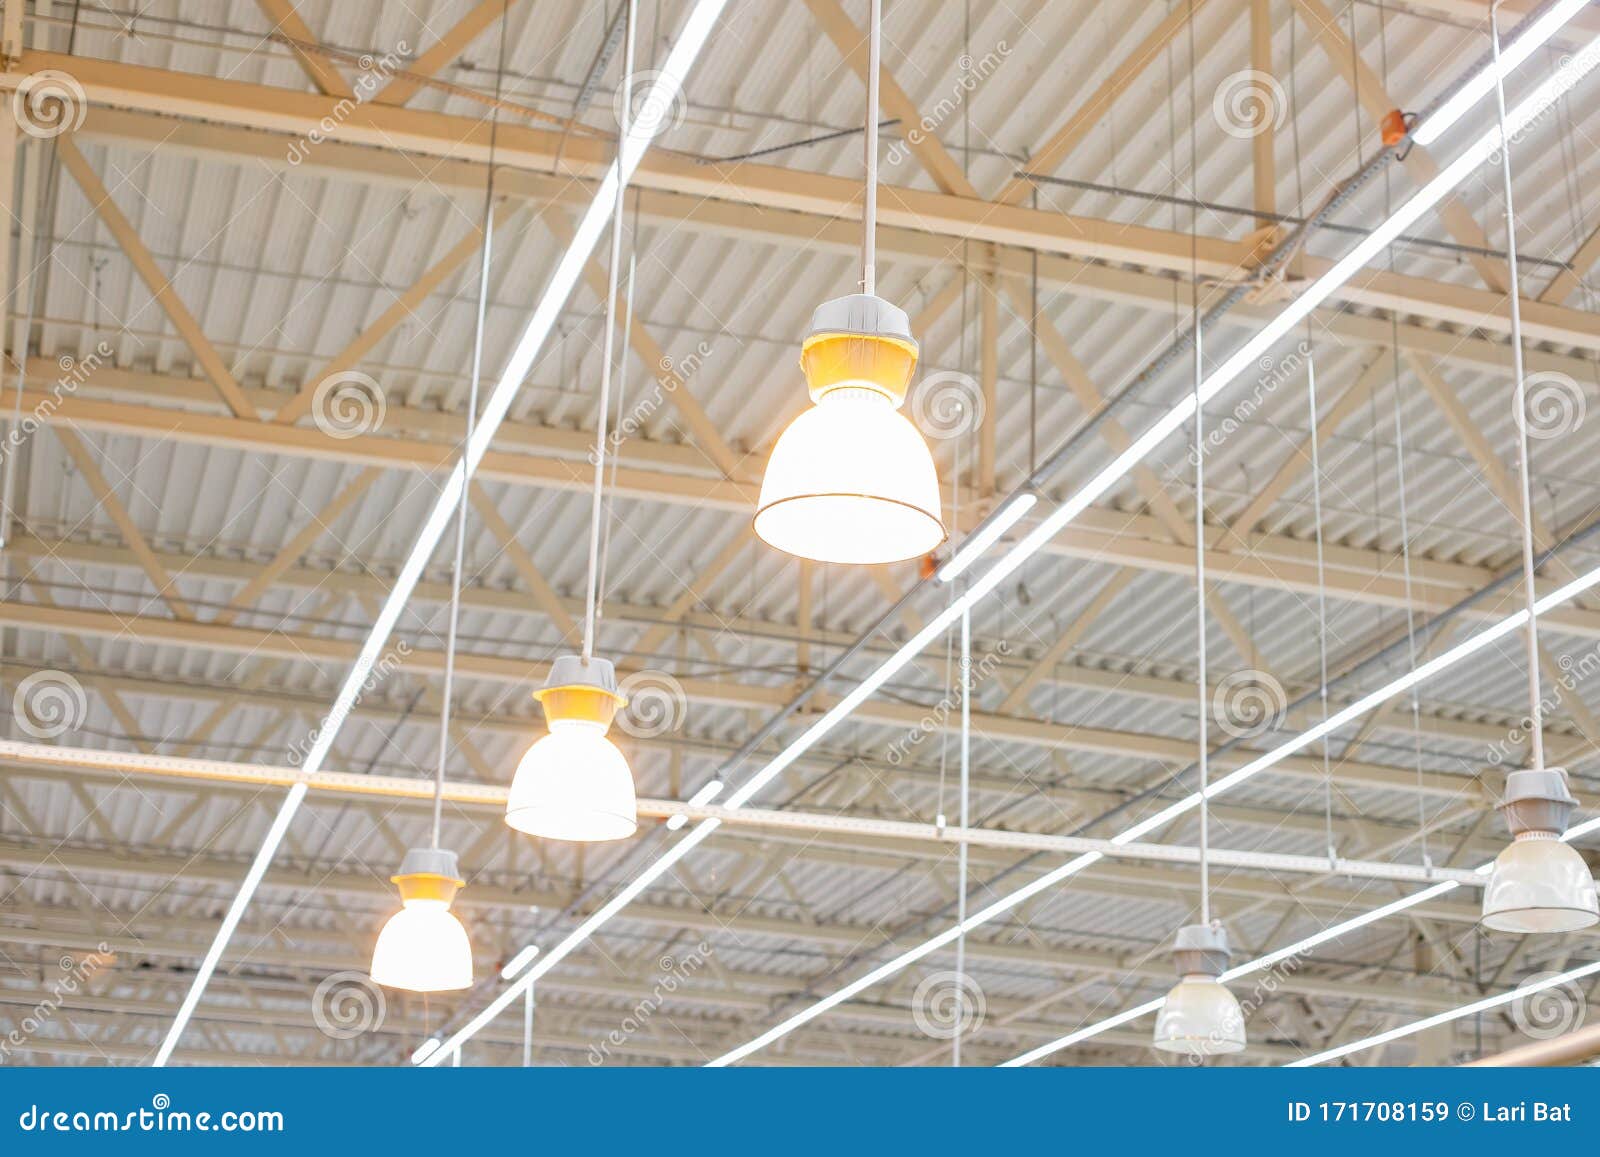 https www dreamstime com ceiling bright lamps modern warehouse image bright light large space trade storage commercial activity large image171708159